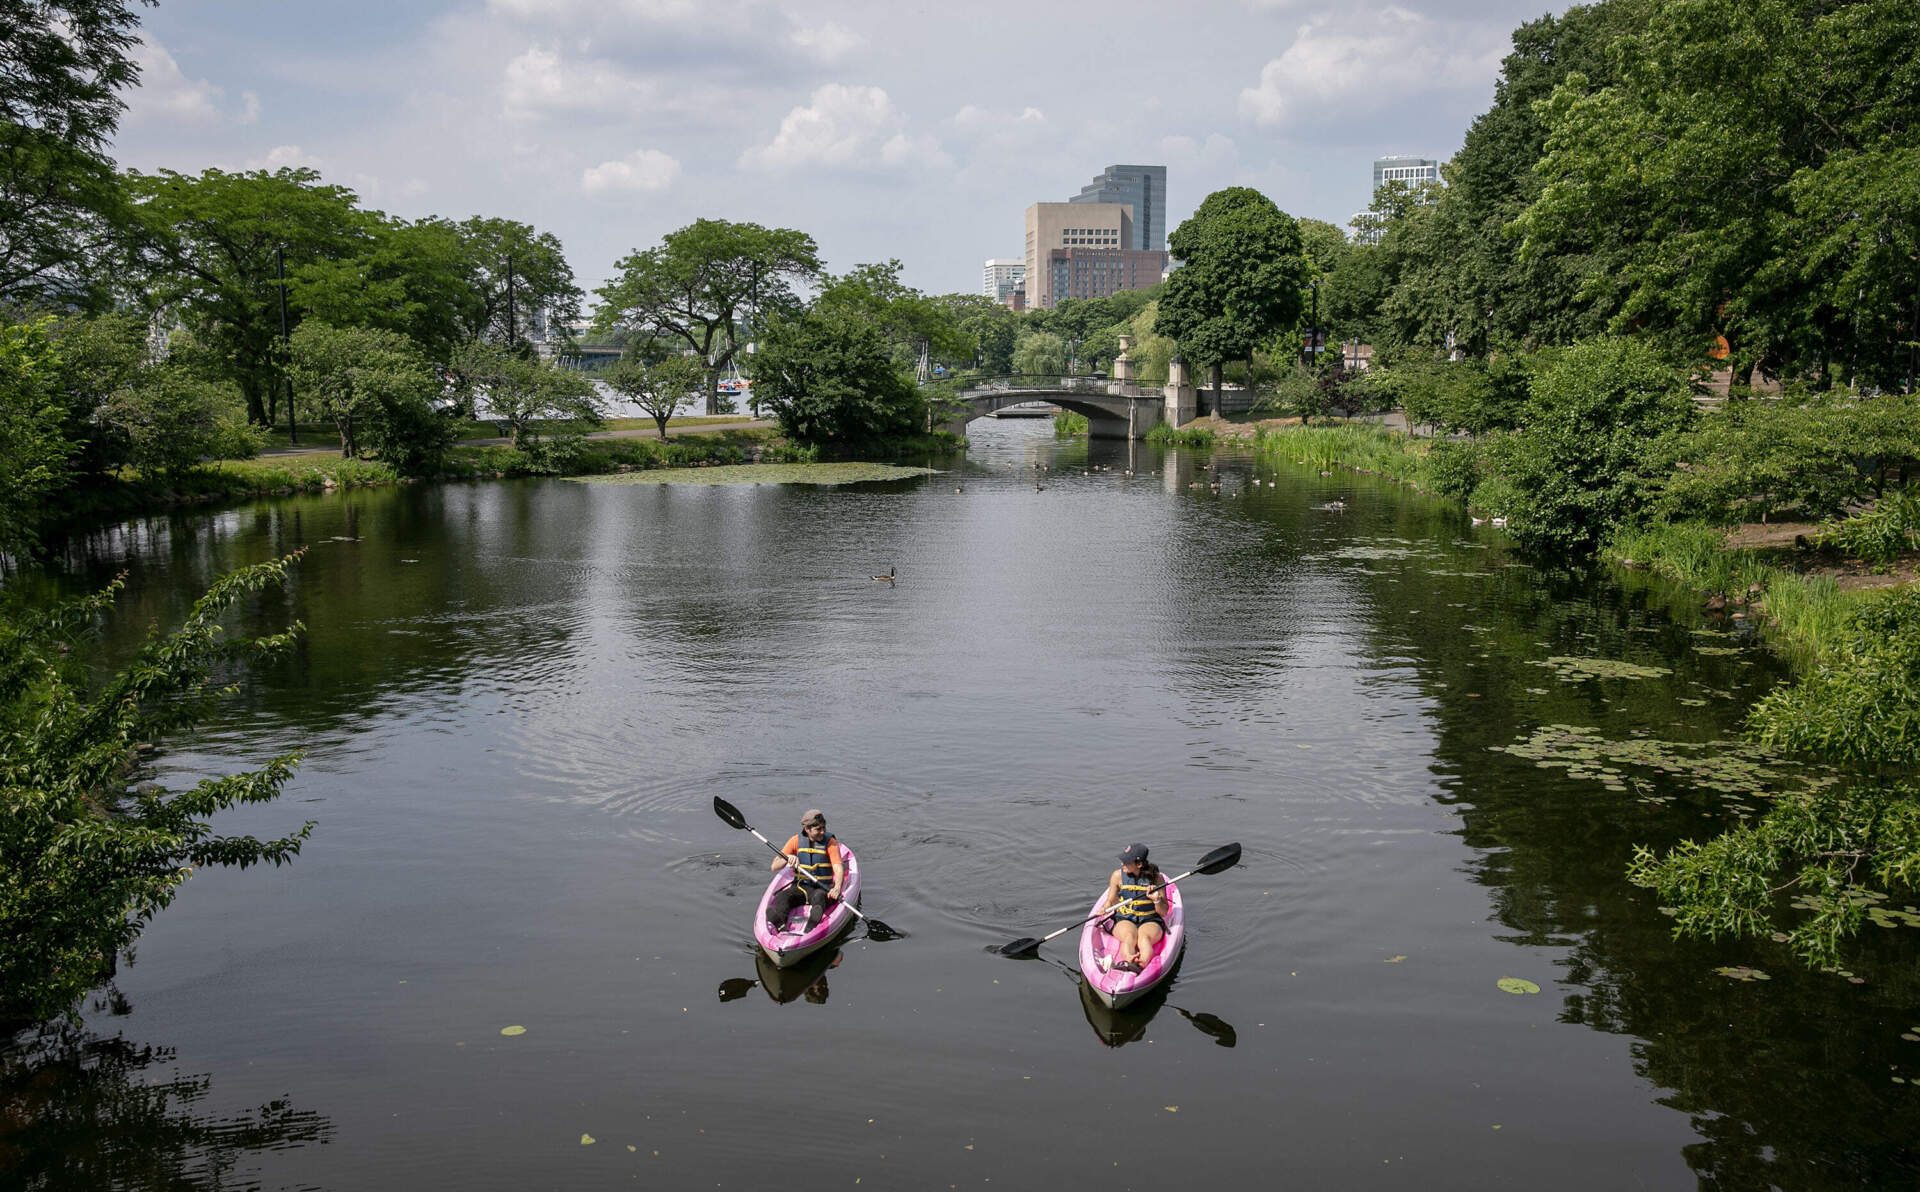 Escaping the heat, canoeists paddle across Storrow Lagoon on the Charles River. (Robin Lubbock/WBUR)